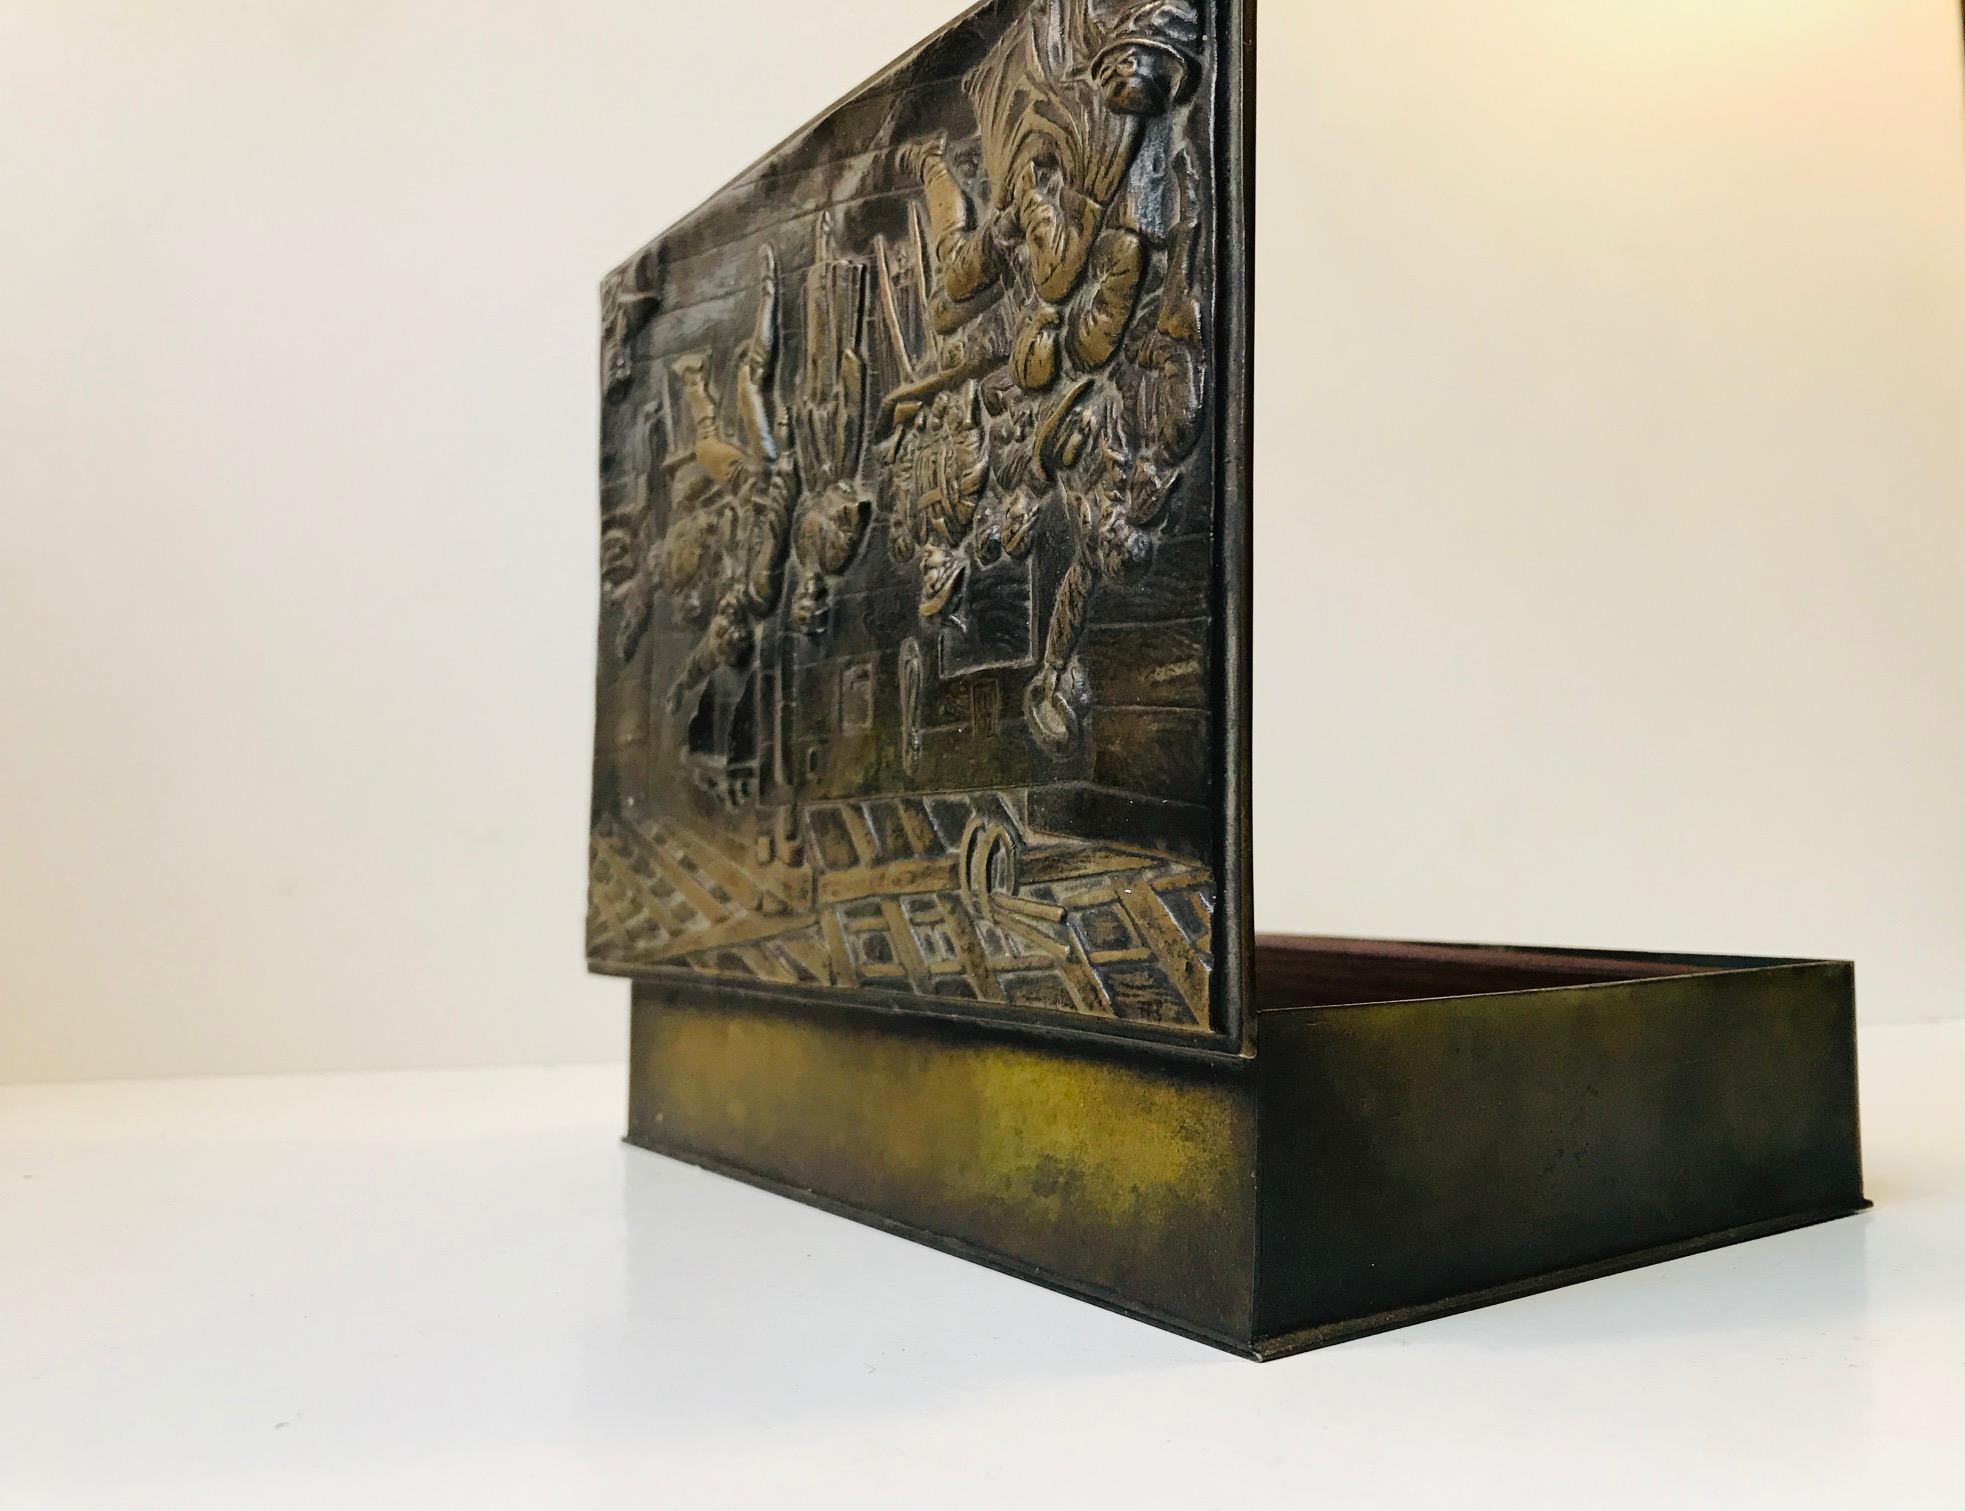 - Art Deco cigar box with medieval motif
- It was designed by Holger Fridericias for his own company HF 
- Produced in Denmark during the 1930s.
- Made of verdigris treated bronze.